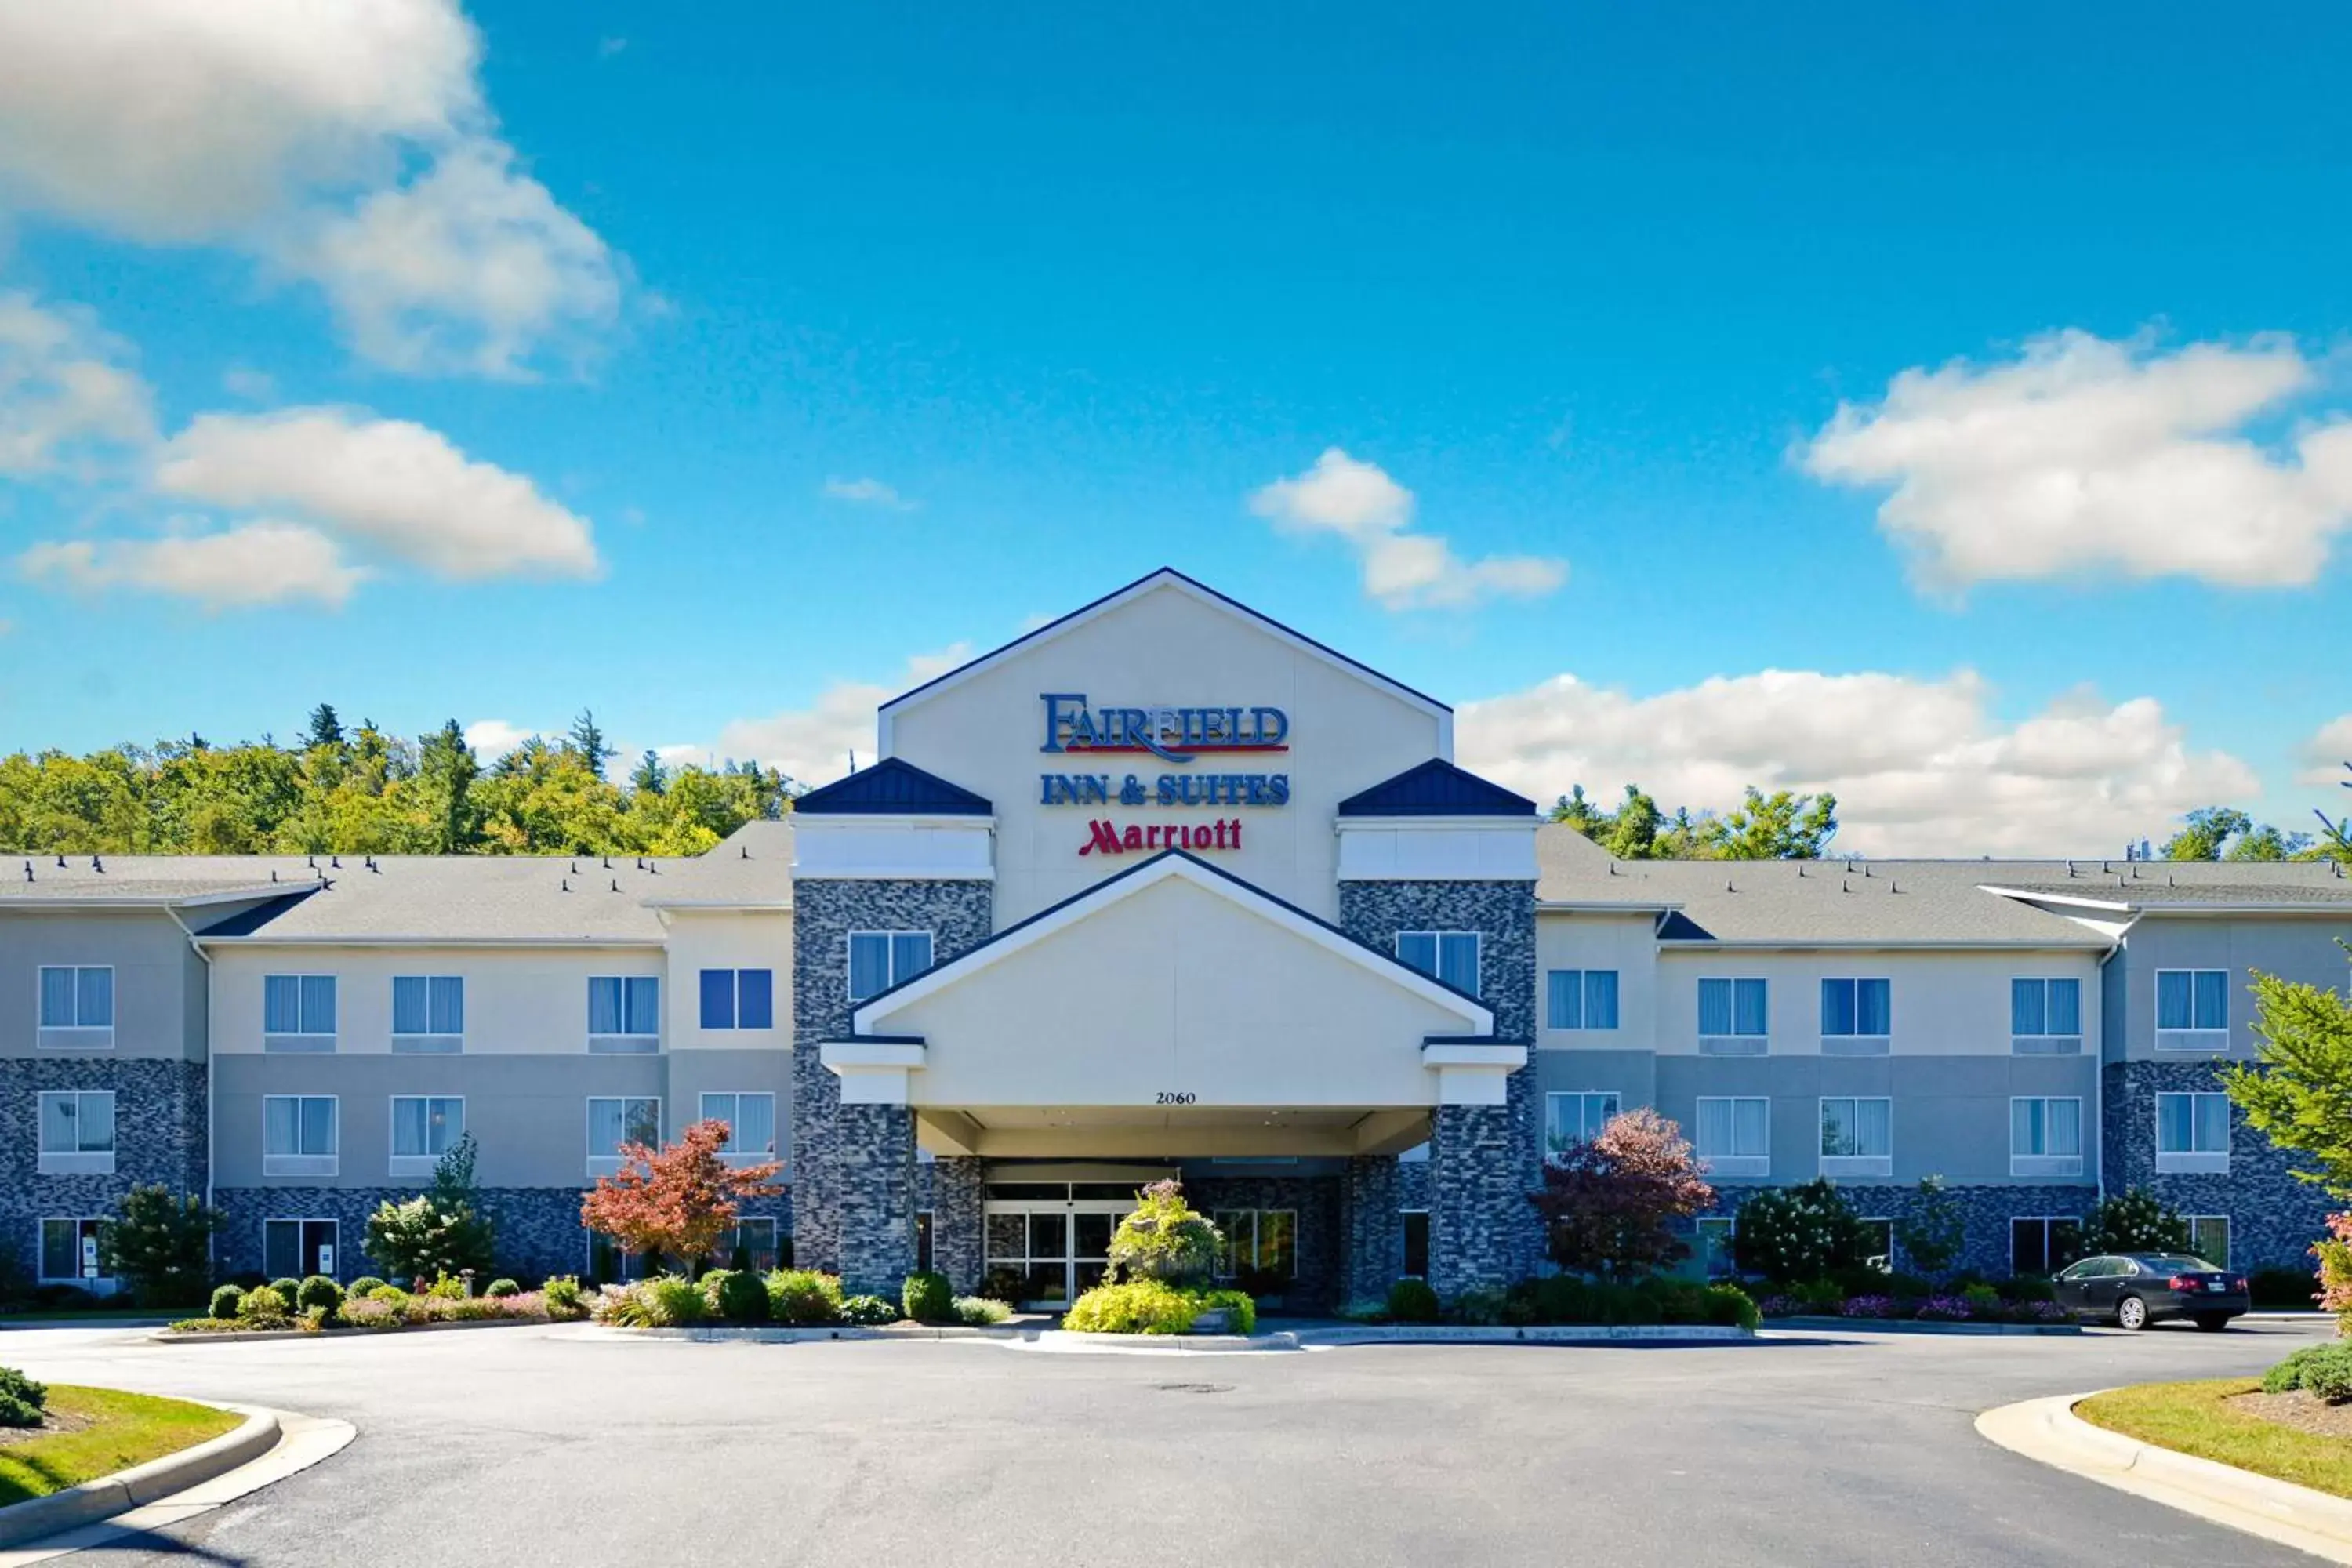 Property Building in Fairfield Inn & Suites - Boone